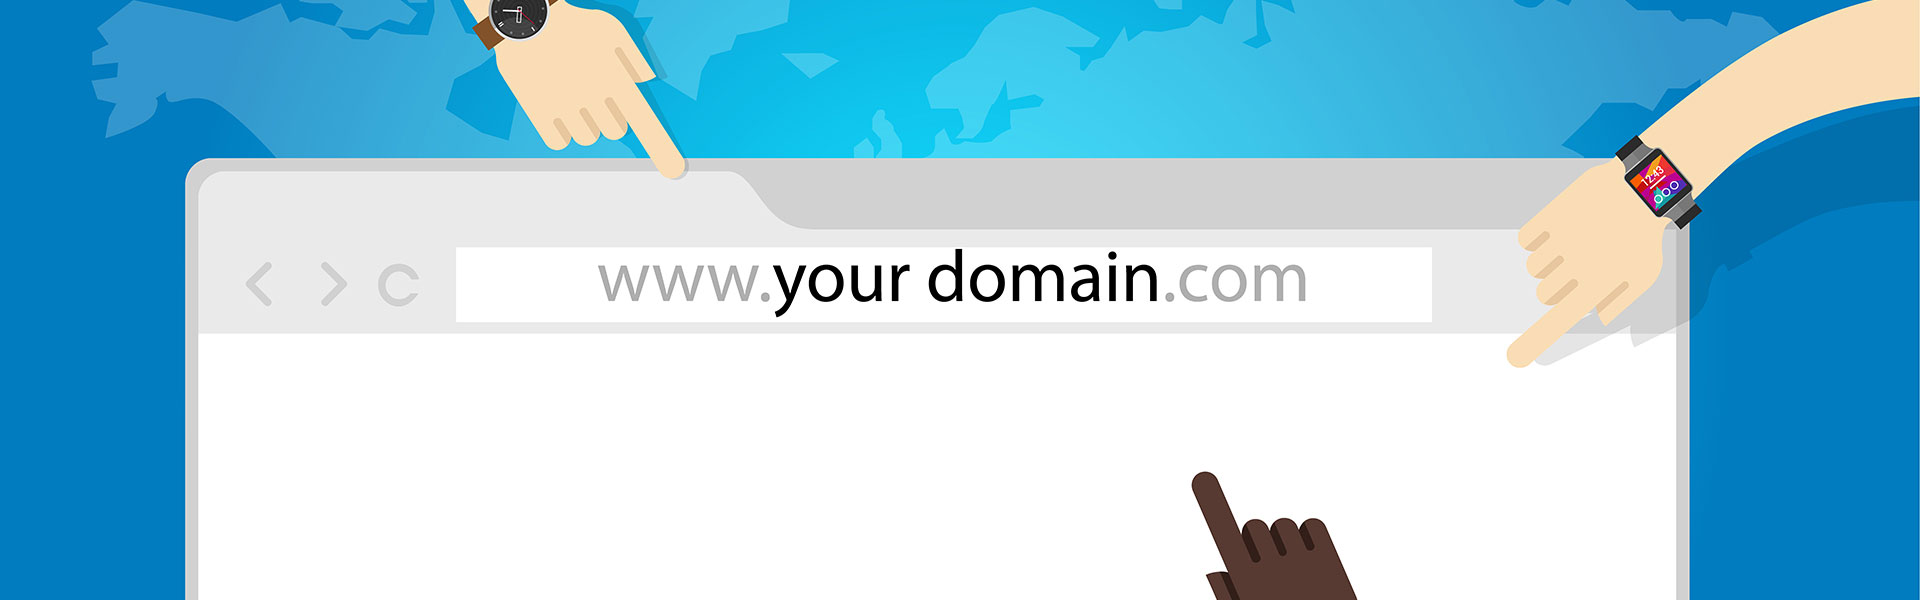 5 Great Tools to Help You Search Domain Names